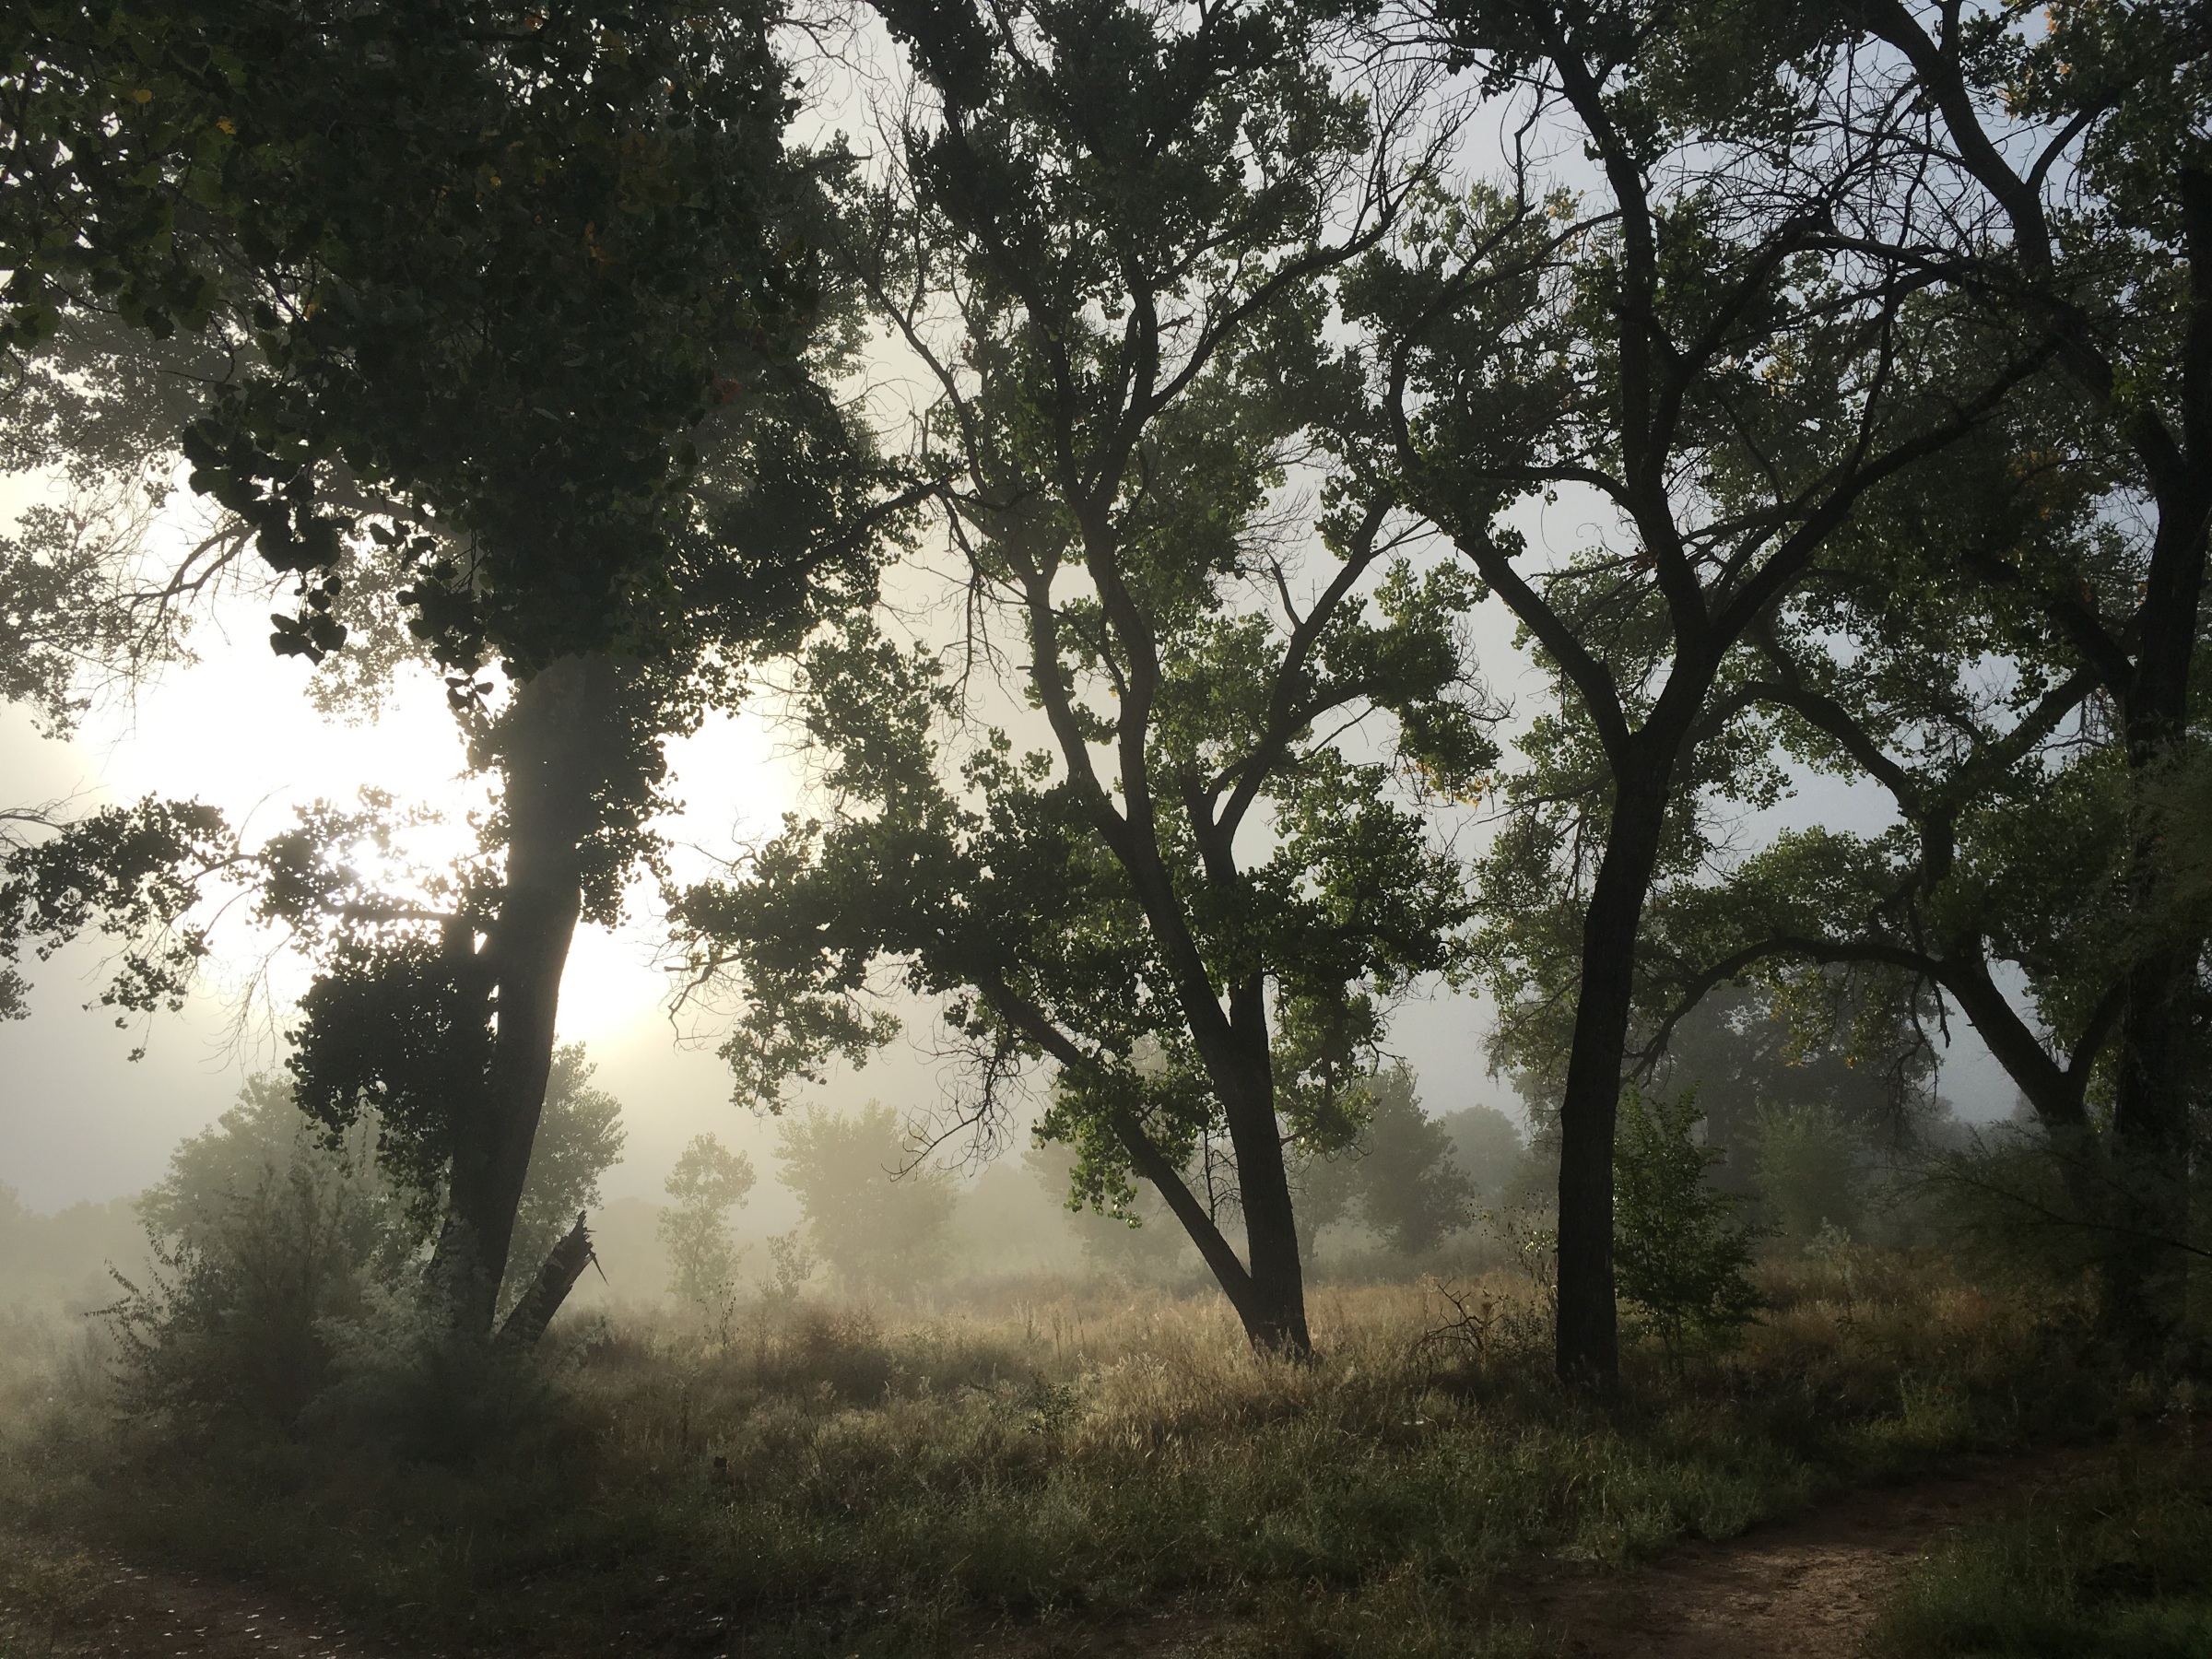 A jpg of the Bosque in Fog.